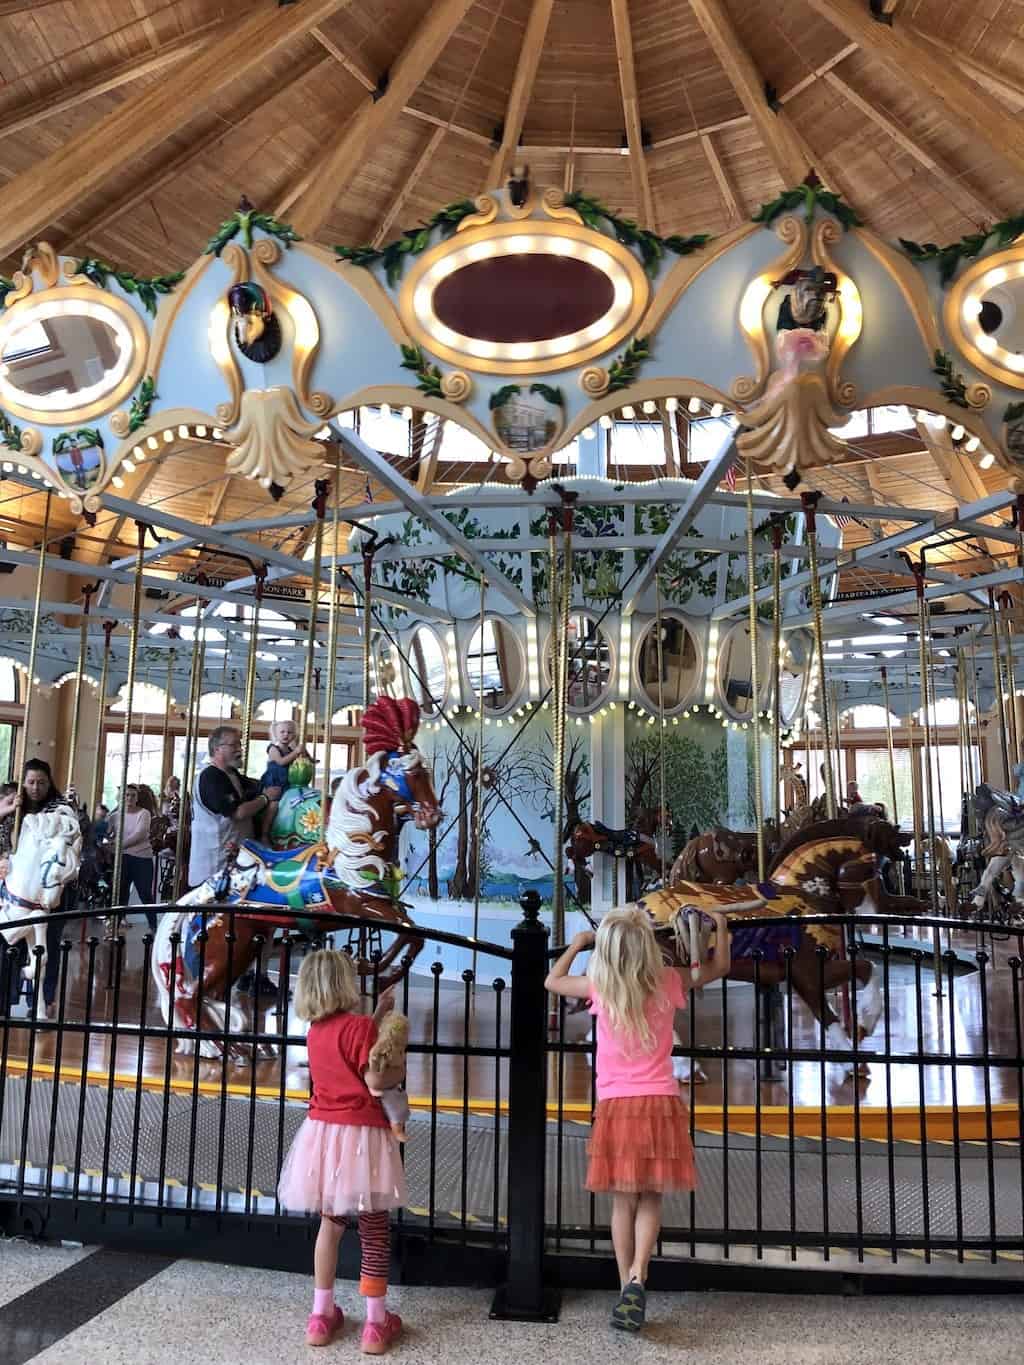 The historic carousel in Albany, Oregon is just one of the fun things to do in this small town's historic downtown. To & Fro Fam